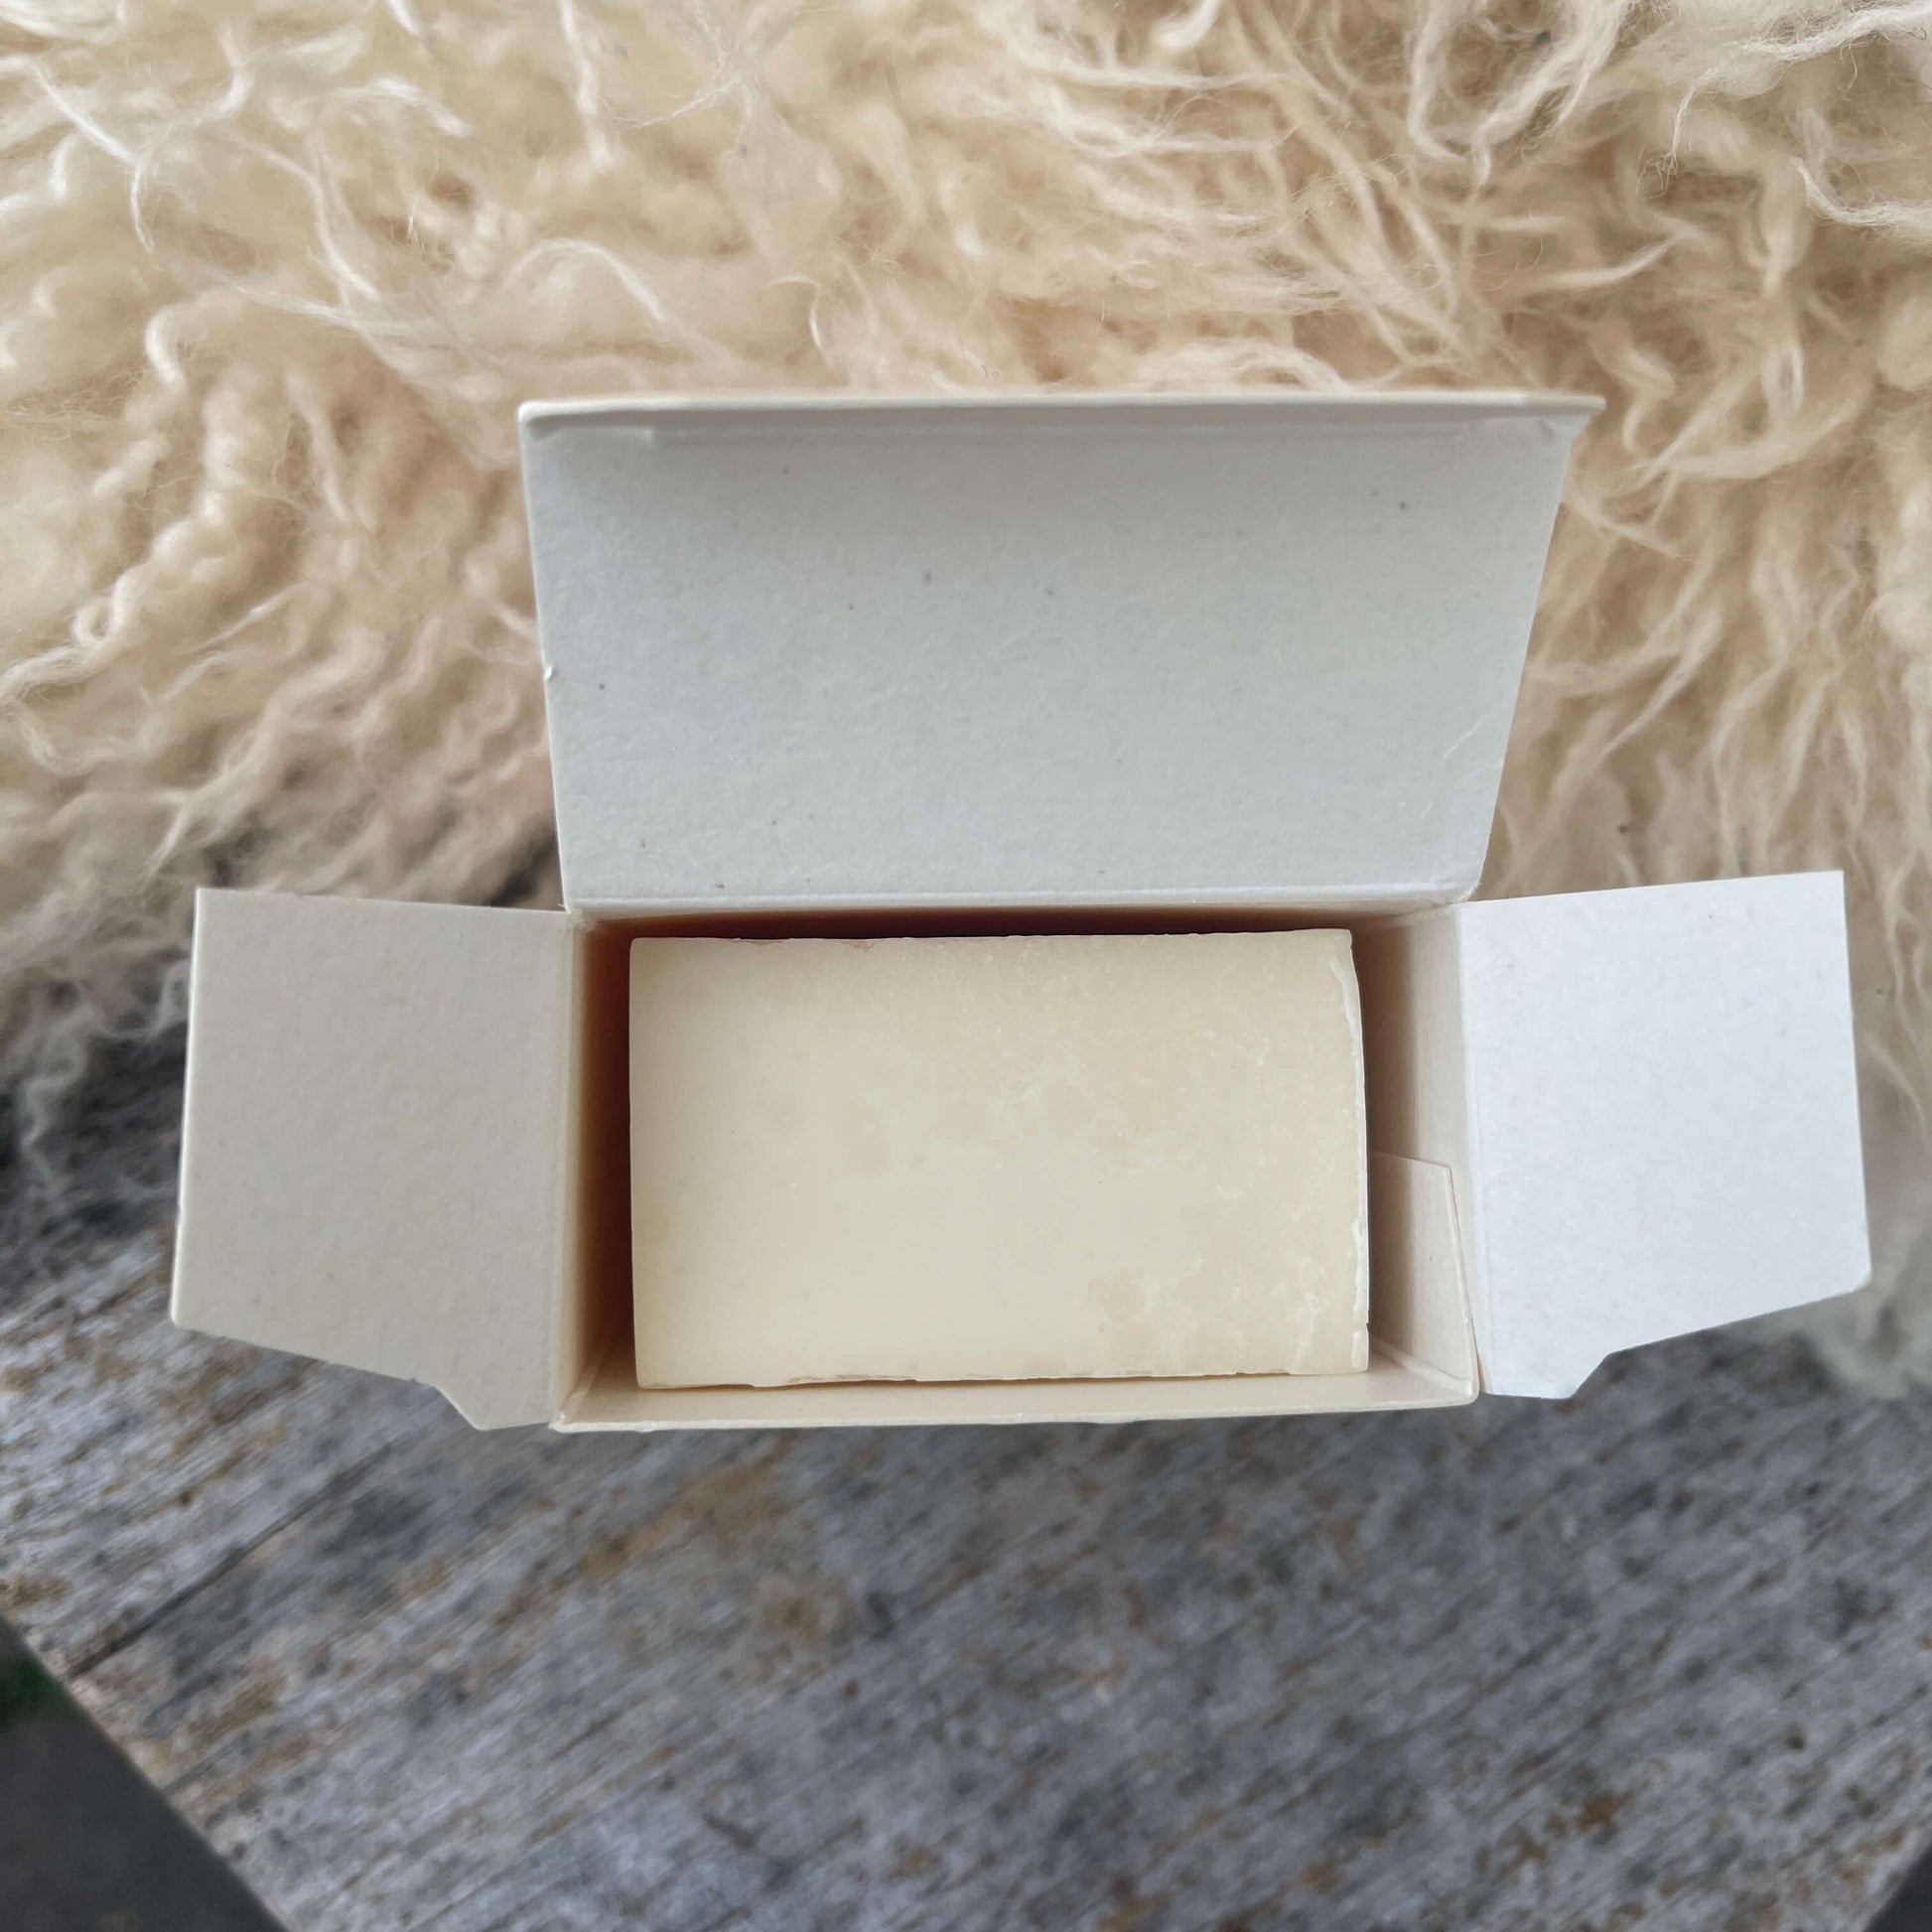 birds eye view of soap in a box